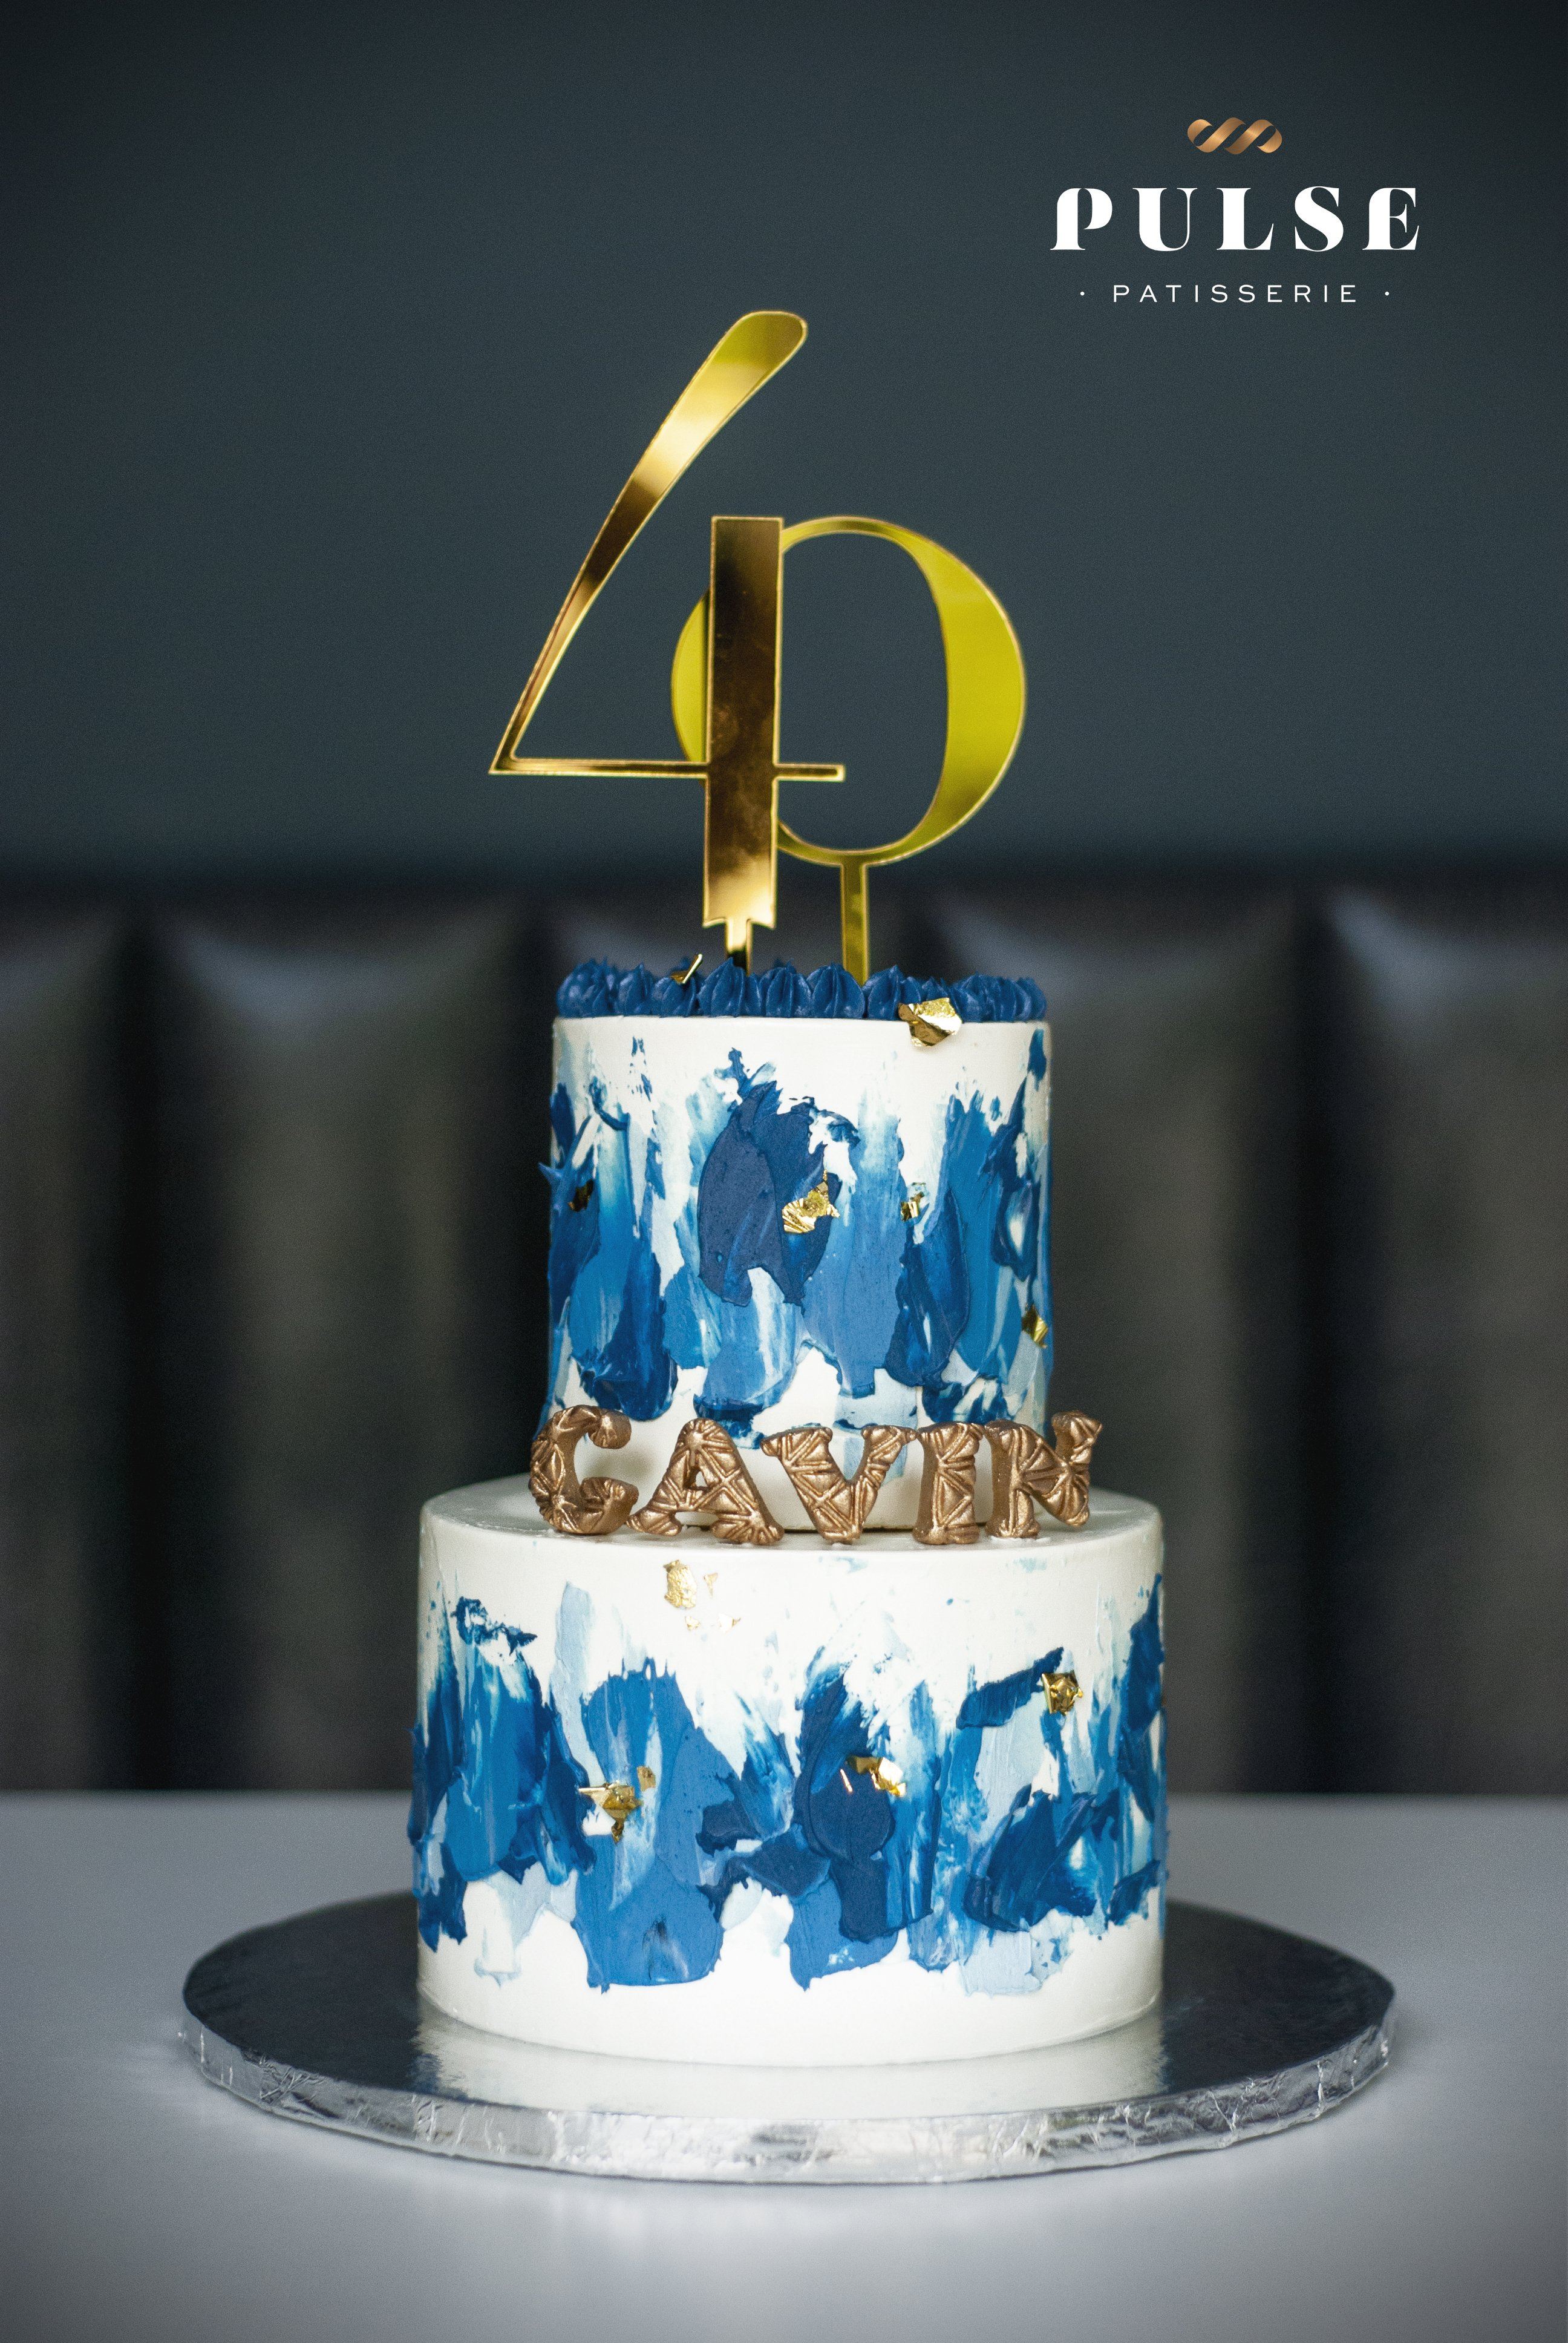 Thunders 'Who's Counting' Cakes - Check them out here 👇